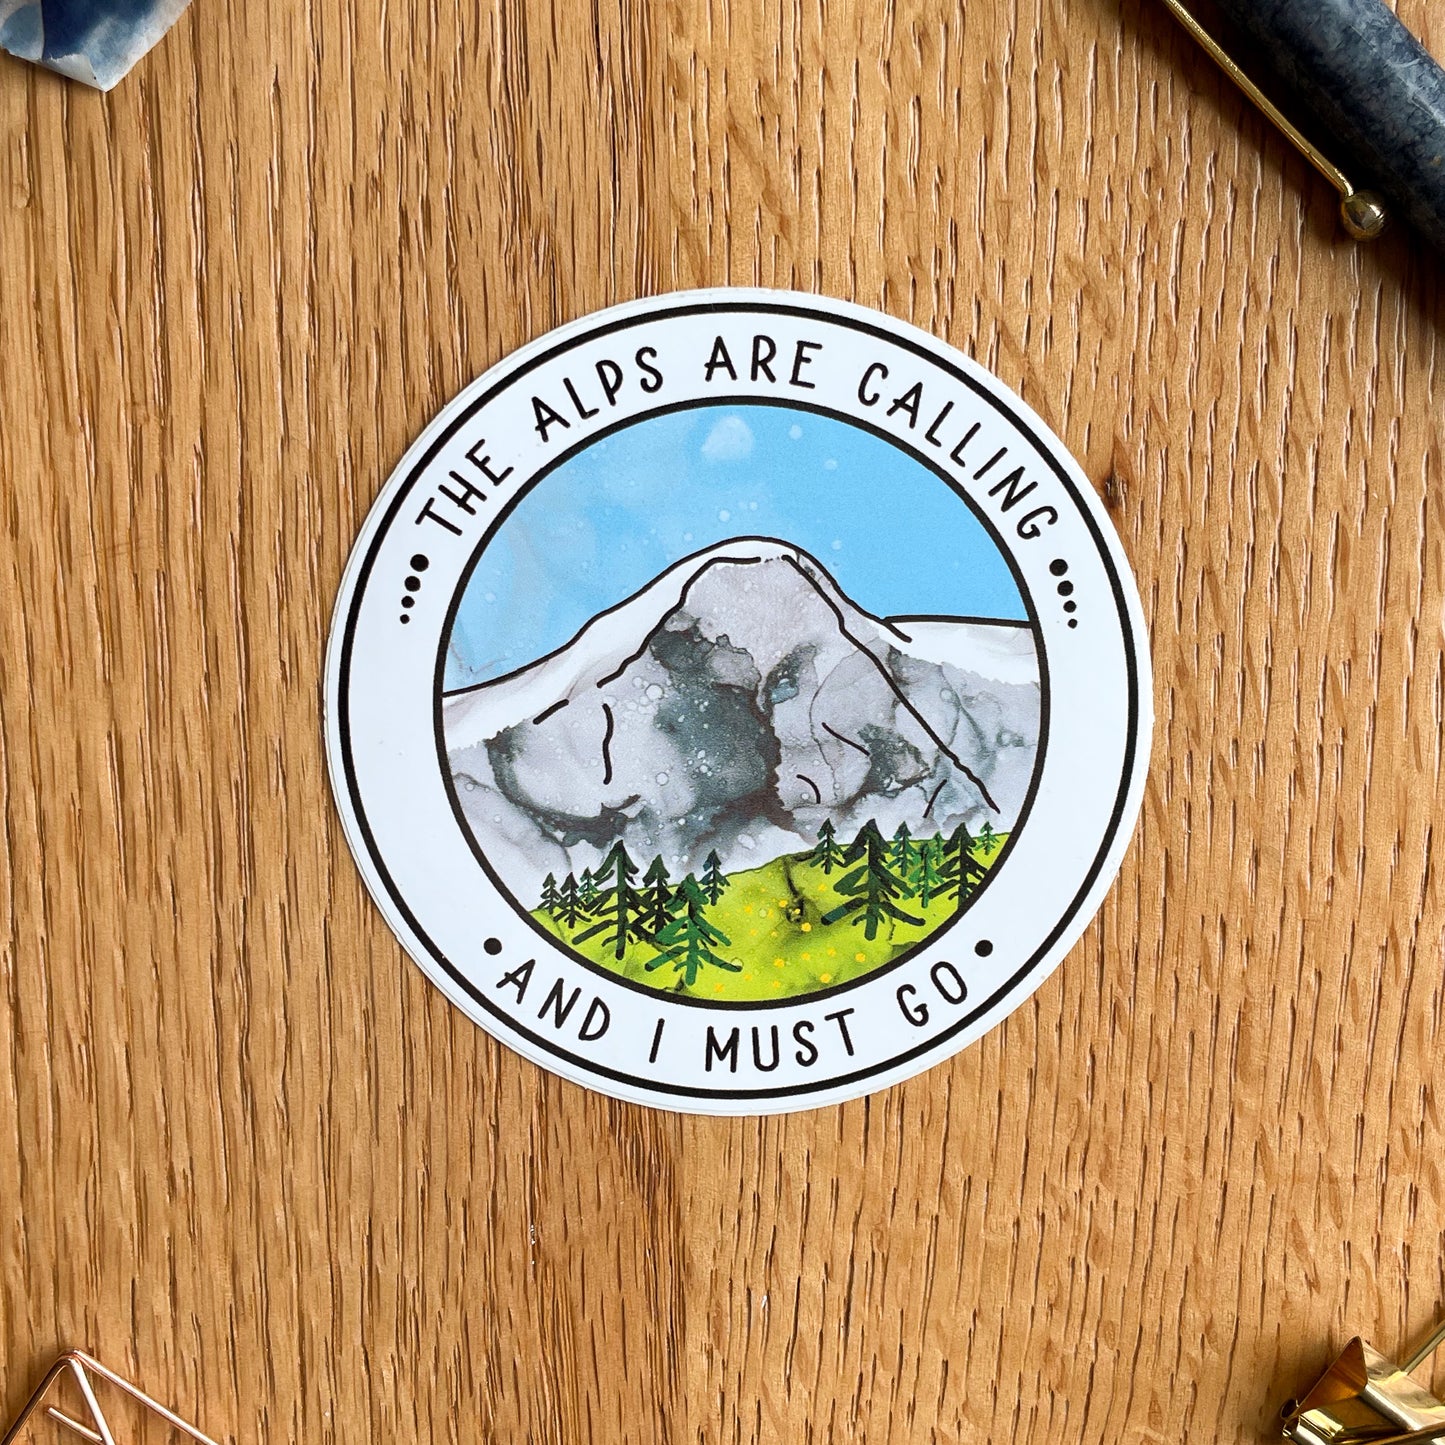 The Alps are Calling and I Must Go - Vinyl Sticker: Embrace the Spirit of Adventure!